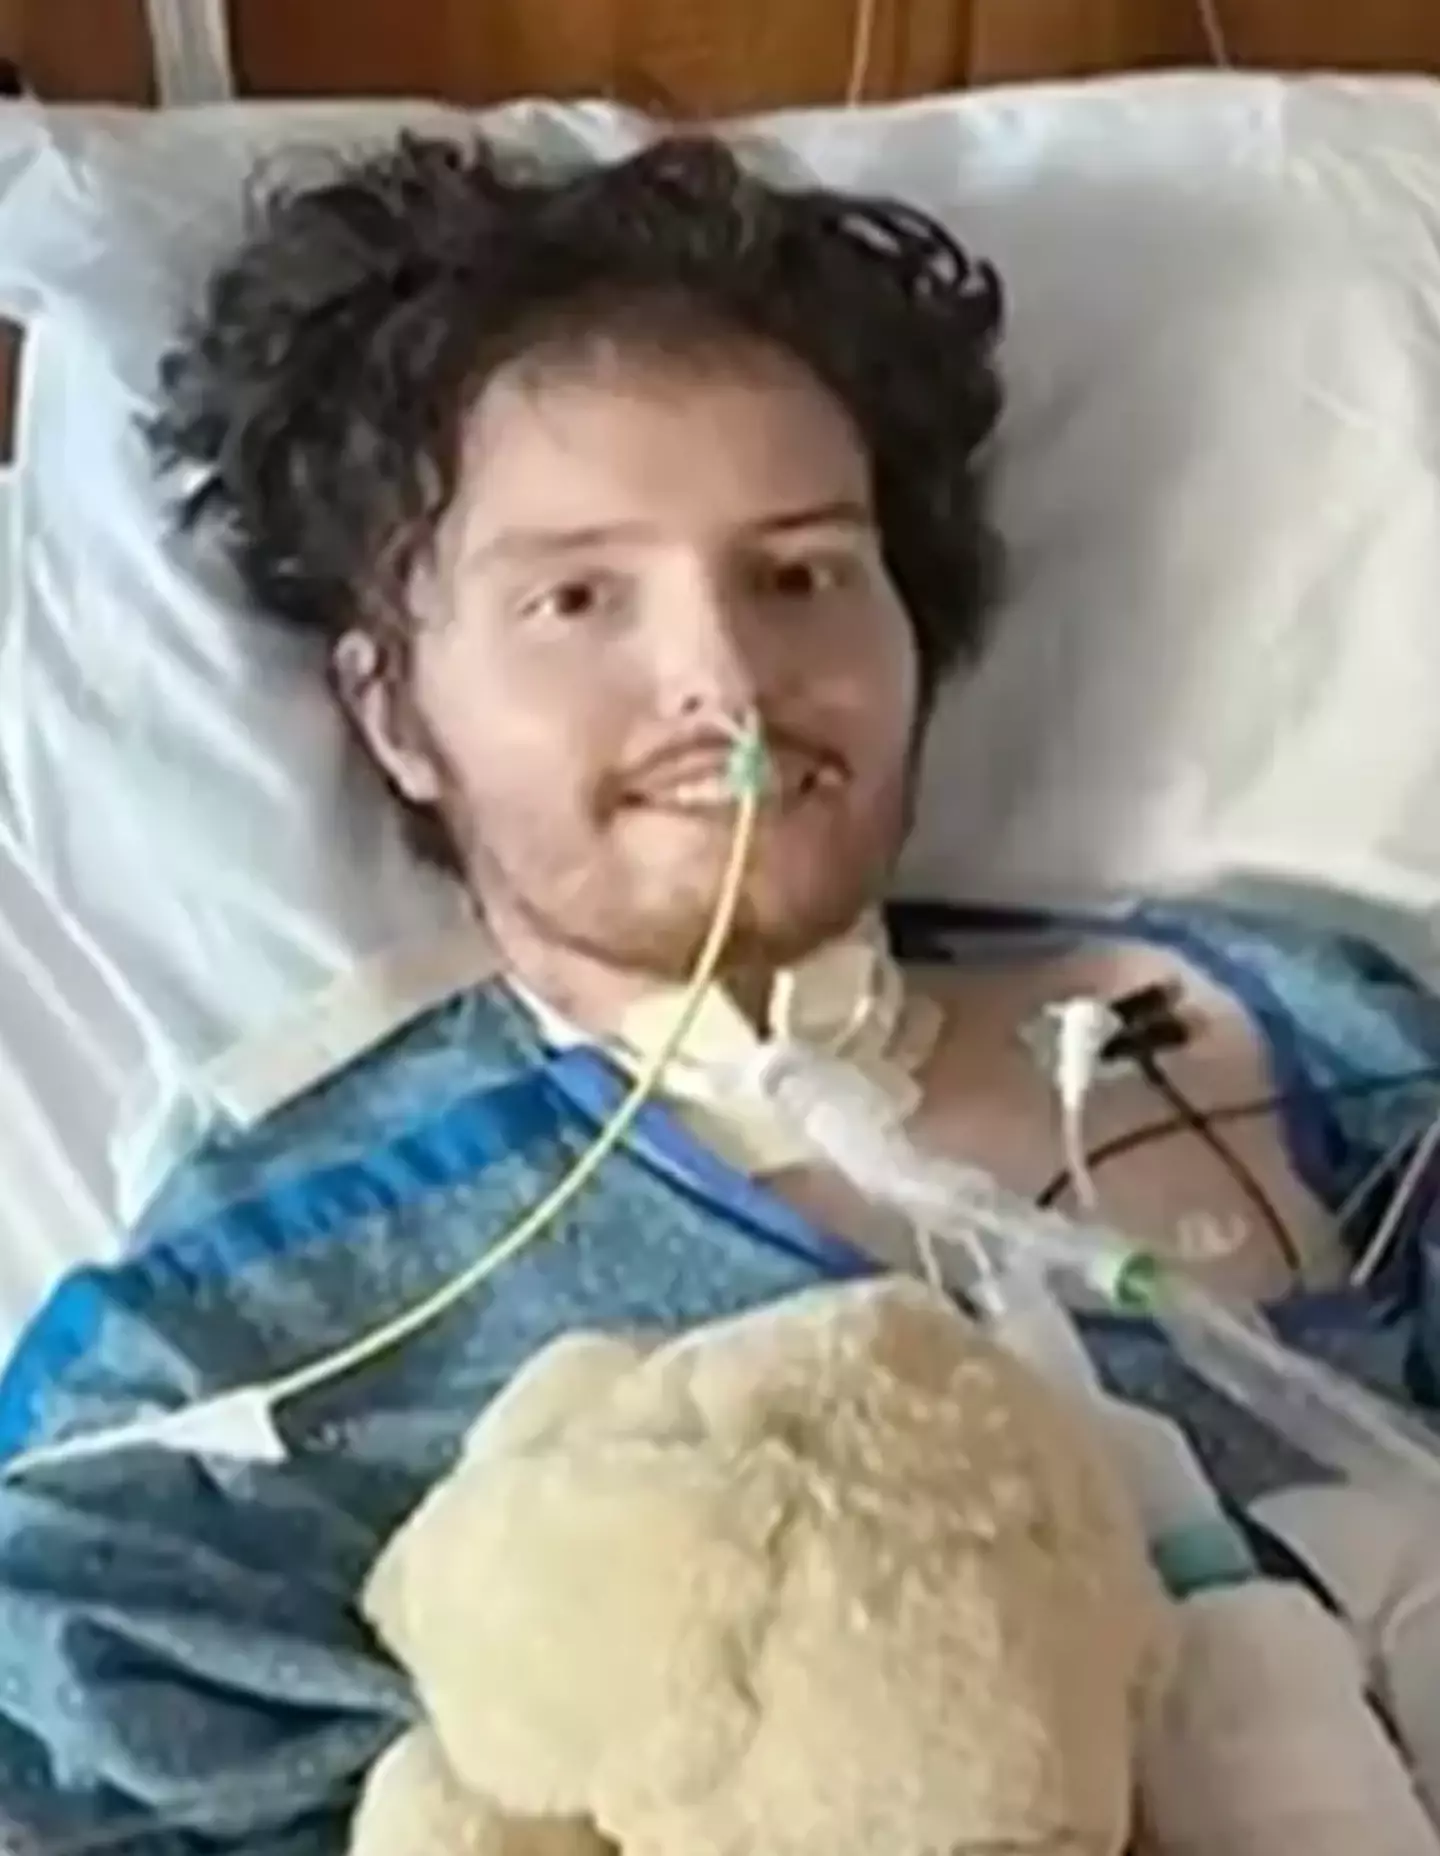 Jackson Allard has had a double lung transplant. (YouTube/Valley News Live)